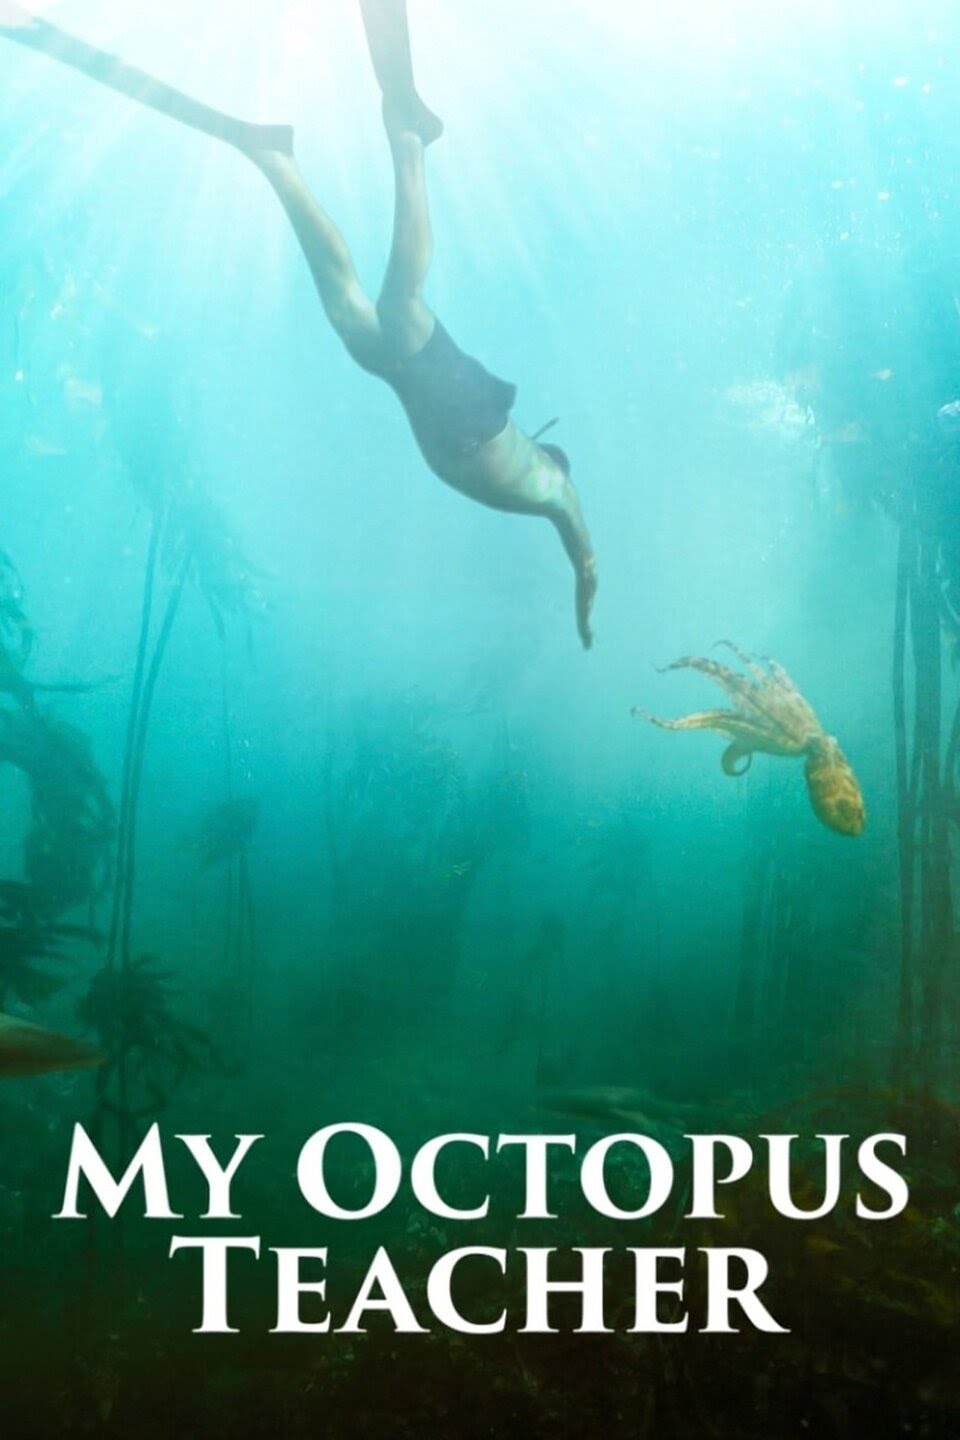 Movie poster for My Octopus Teacher featuring a man diving with an octopus.